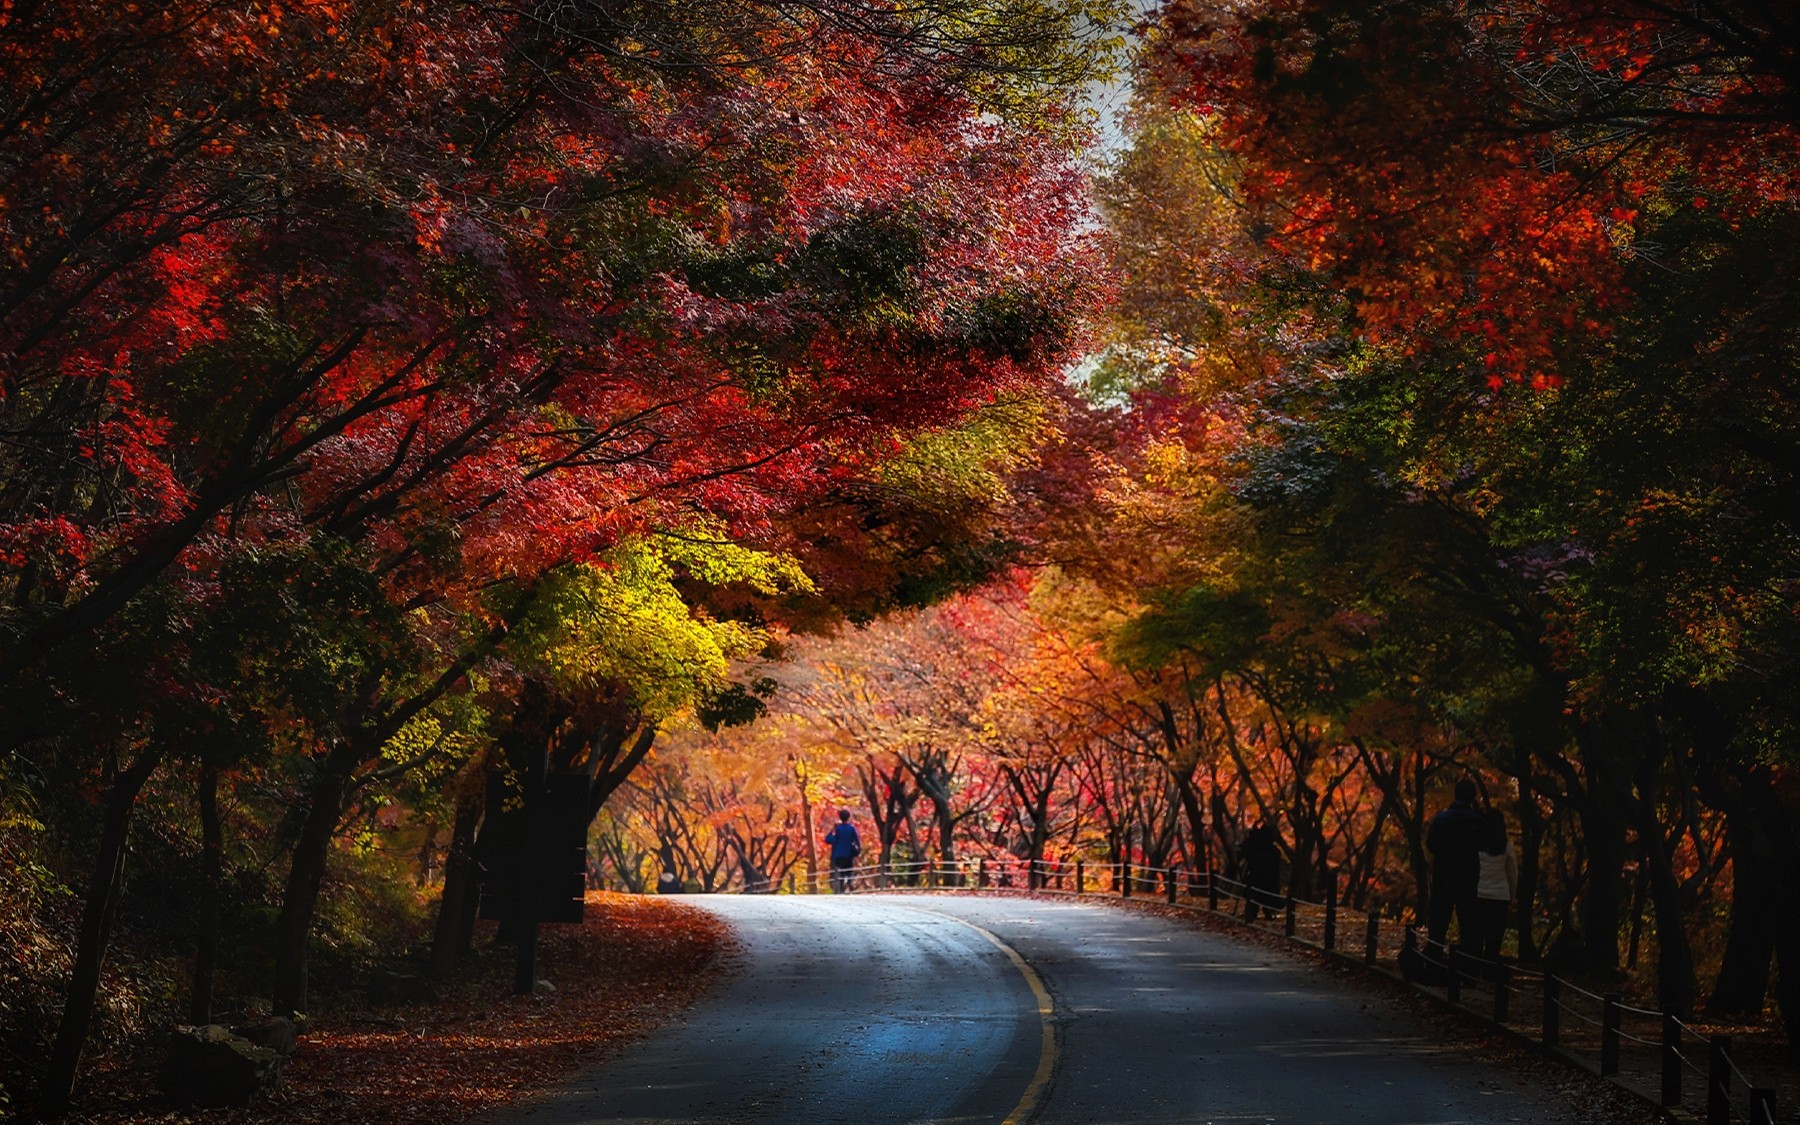 Wallpaper, sunlight, trees, landscape, forest, fall, leaves, people, nature, red, road, branch, green, yellow, blue, evening, morning, tunnel, tree, autumn, leaf, flower, season, woodland, computer wallpaper, woody plant 1800x1125